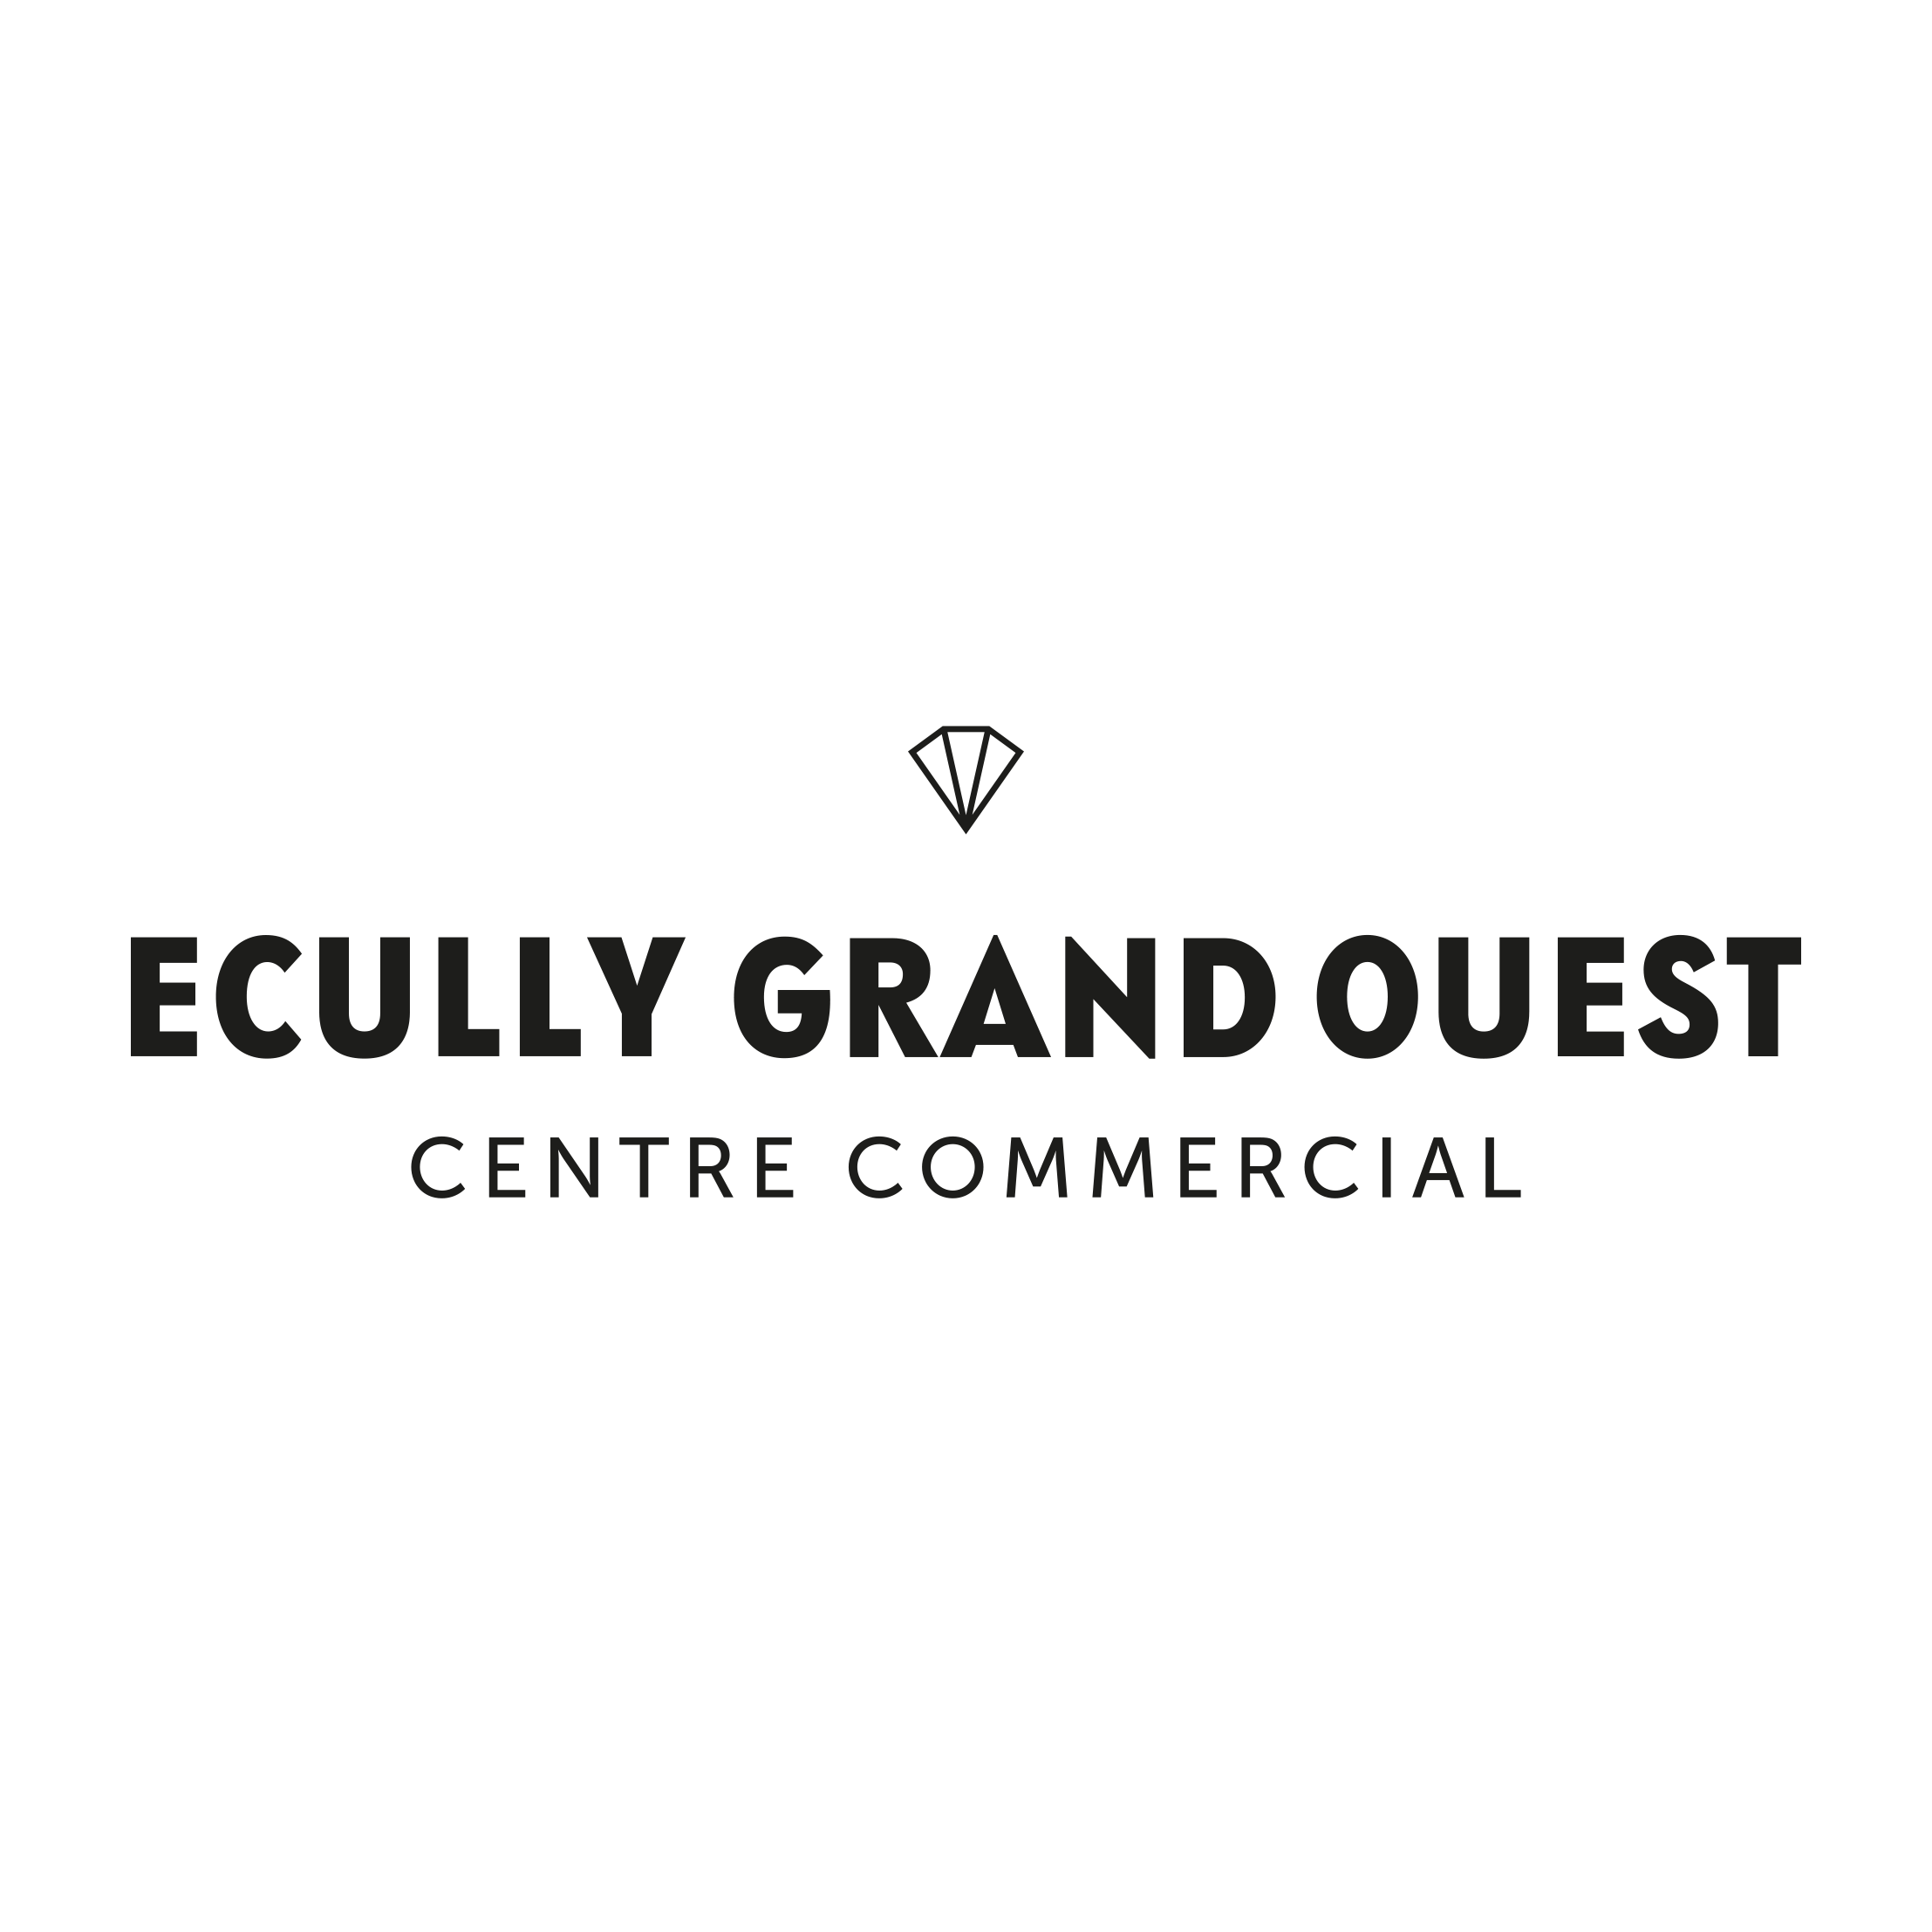 Ecully_Grand_Ouest_Advertlogo_fd_blc